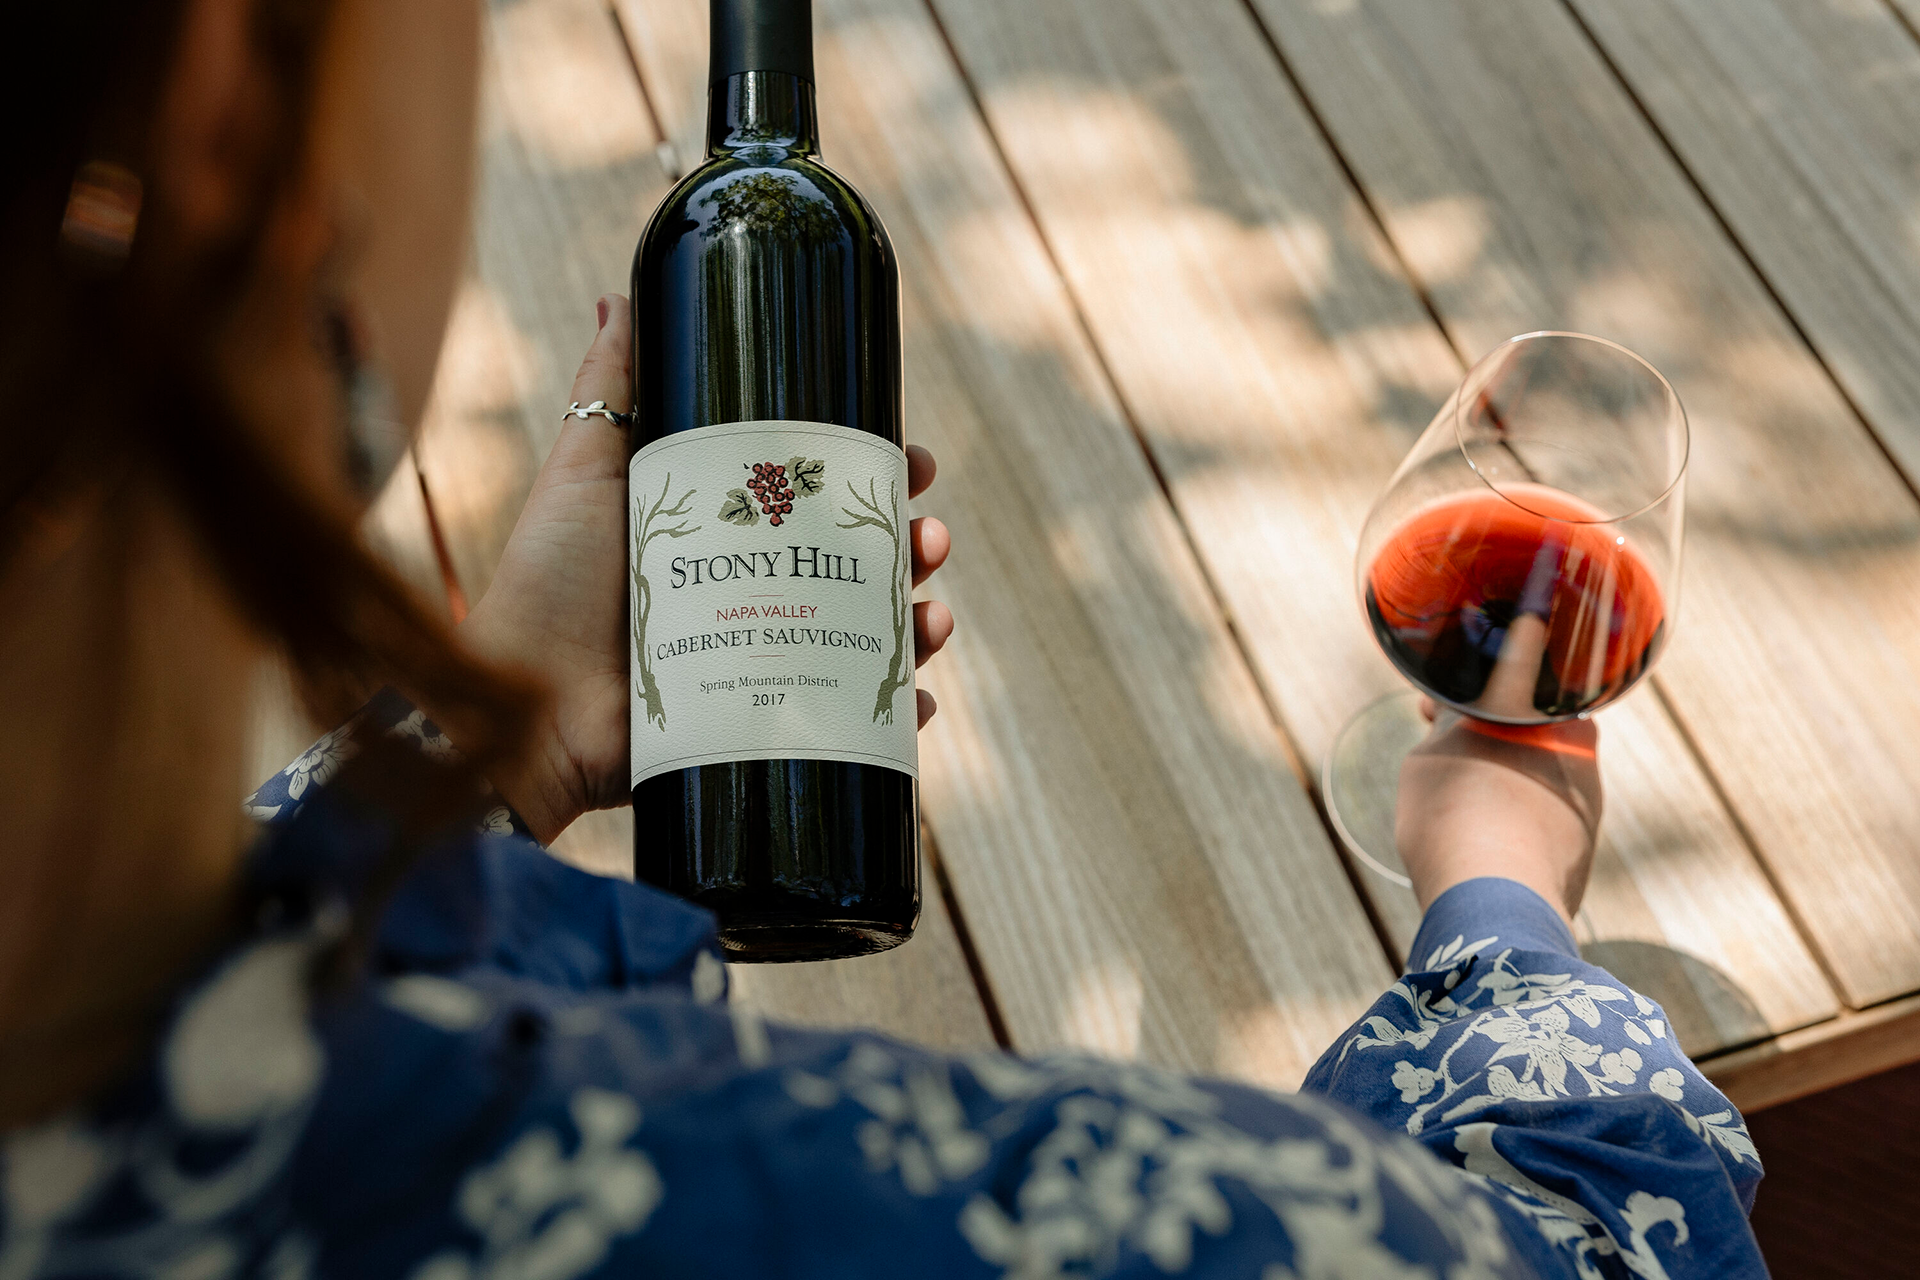 A guest holding a bottle of Stony Hill Cabernet Sauvignon in one hand, and a glass of wine in the other hand.